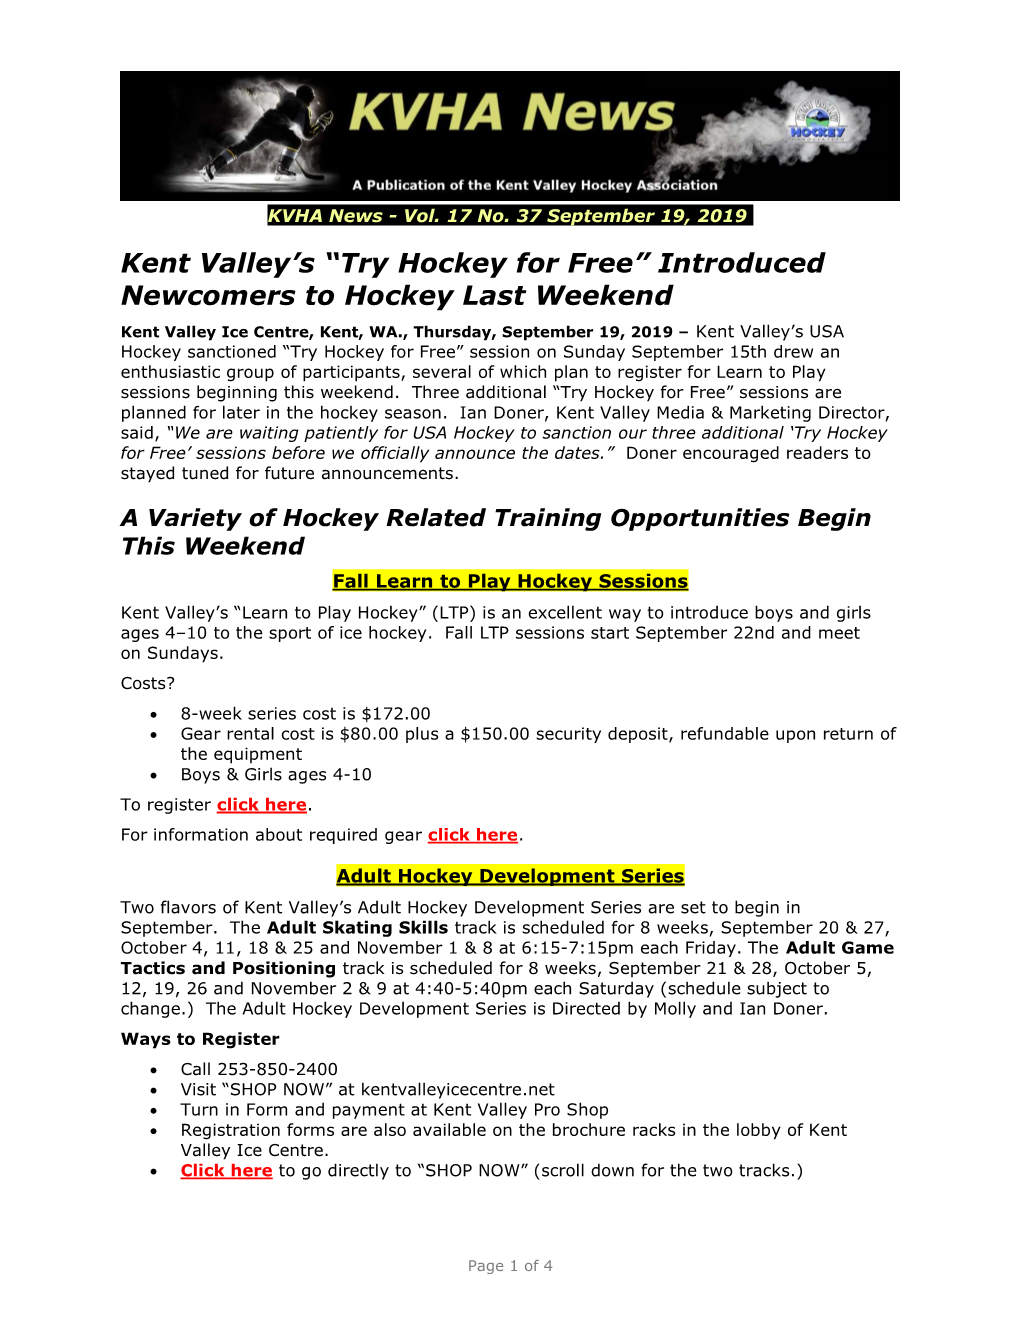 Kent Valley's “Try Hockey for Free”